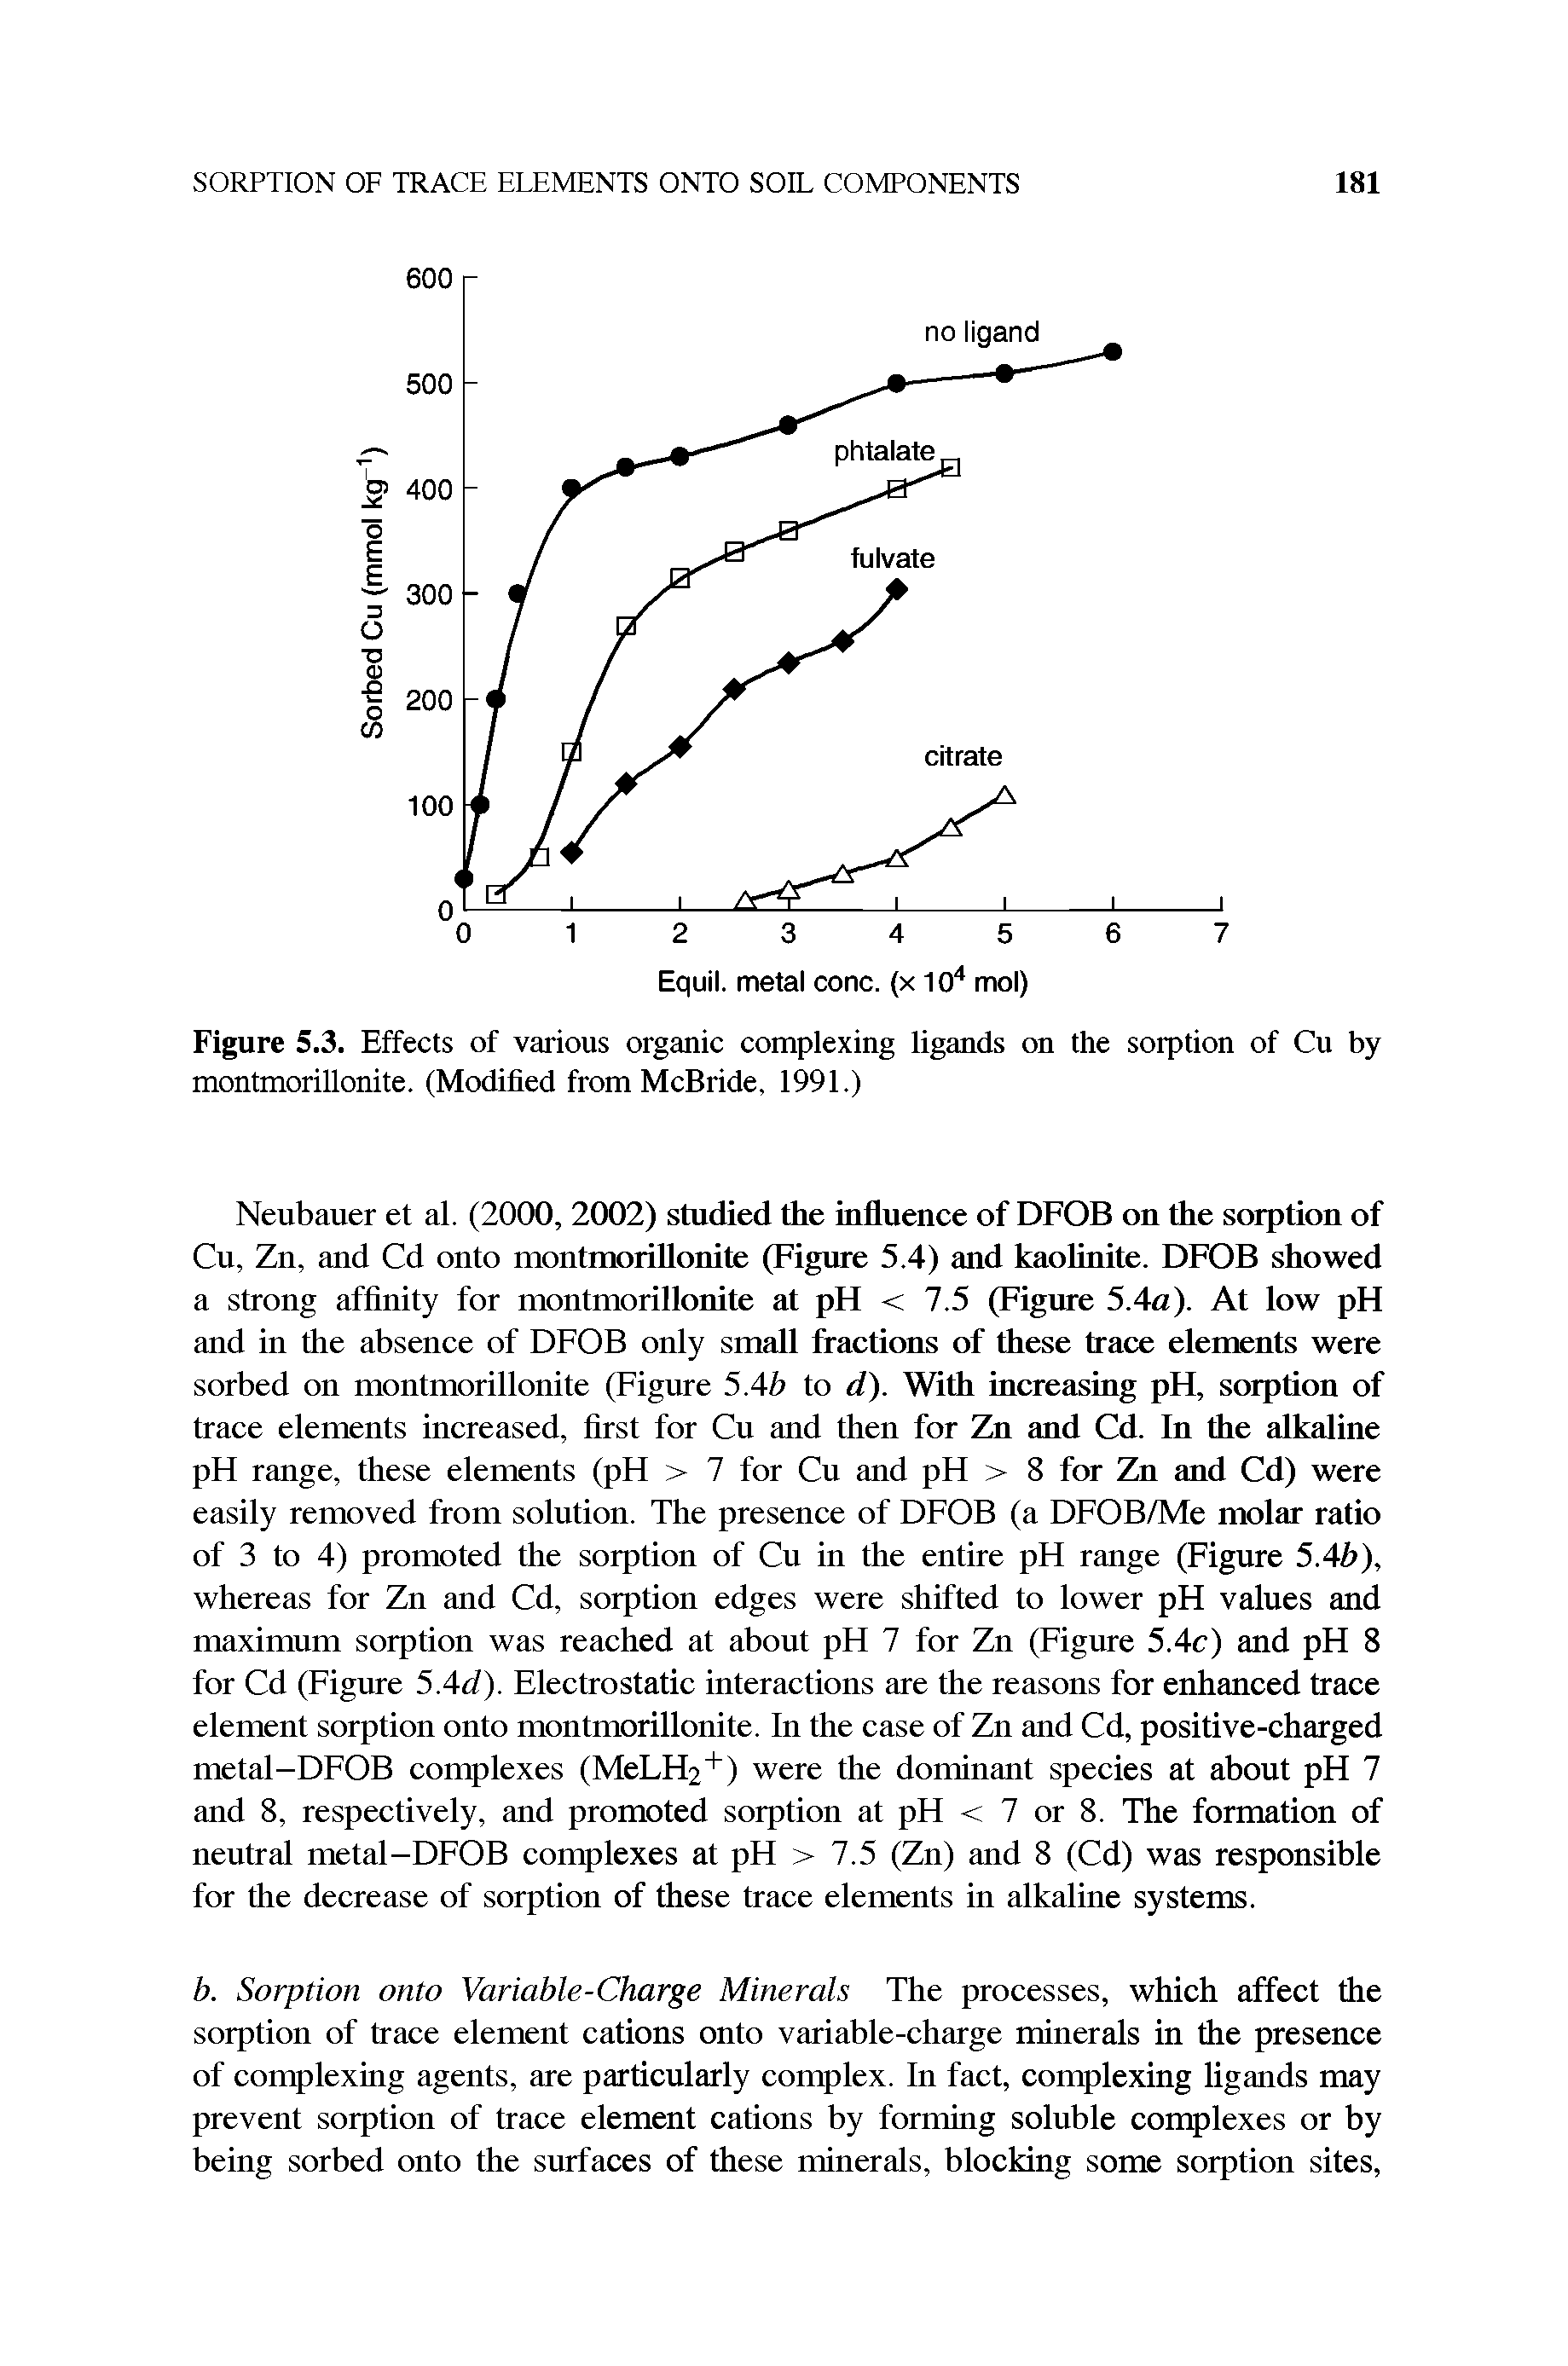 Figure 5.3. Effects of various organic complexing ligands on the sorption of Cu by montmorillonite. (Modified from McBride, 1991.)...